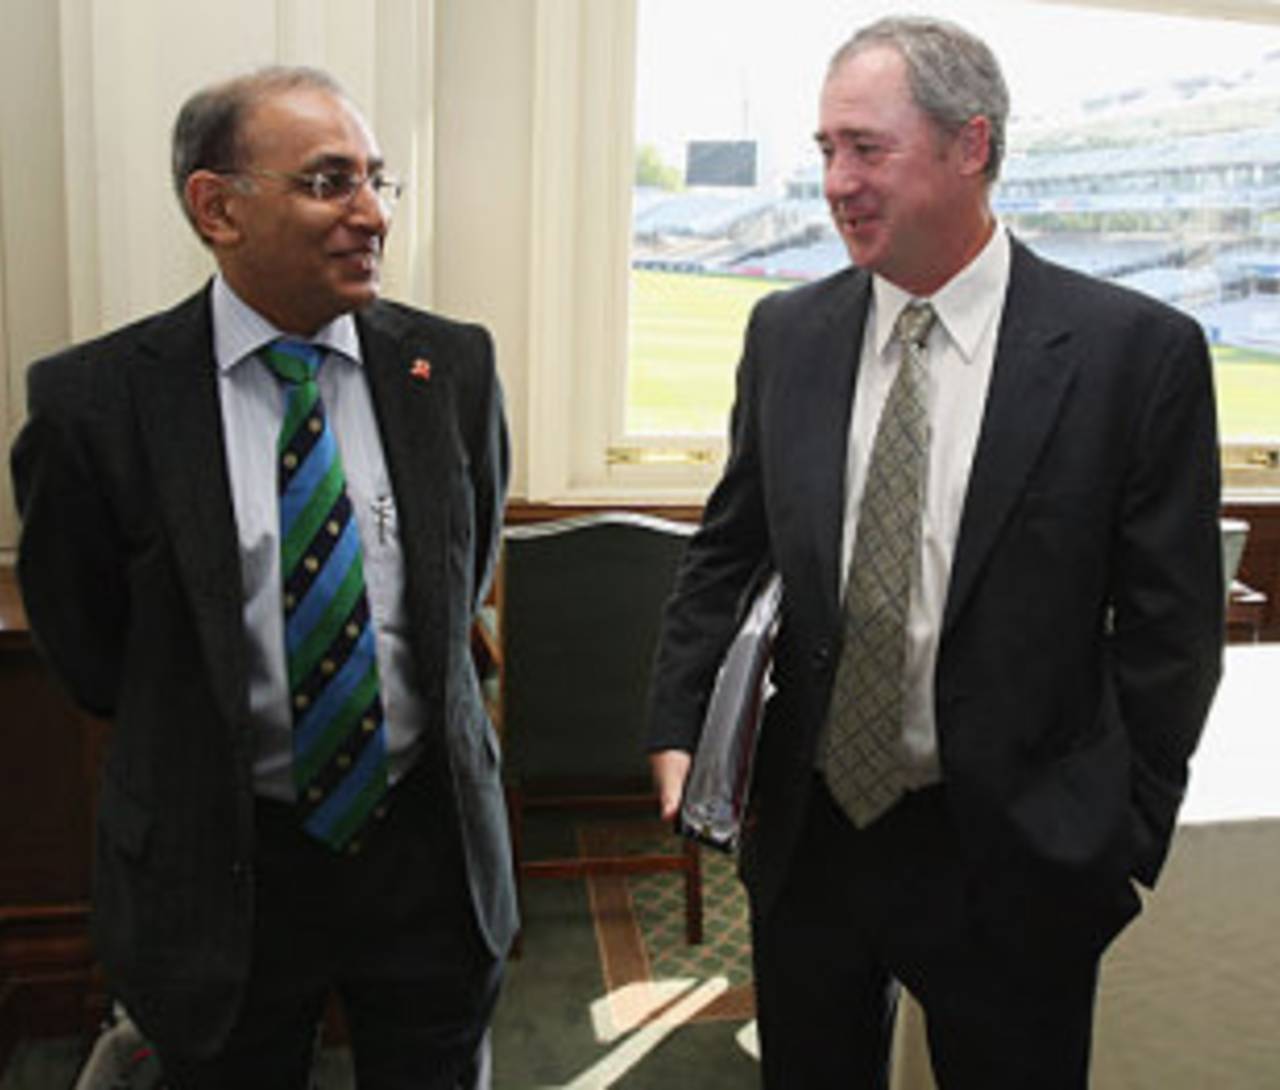 Haroon Lorgat chats with Tim May at the ICC Committee meeting, Lord's, May 11, 2009